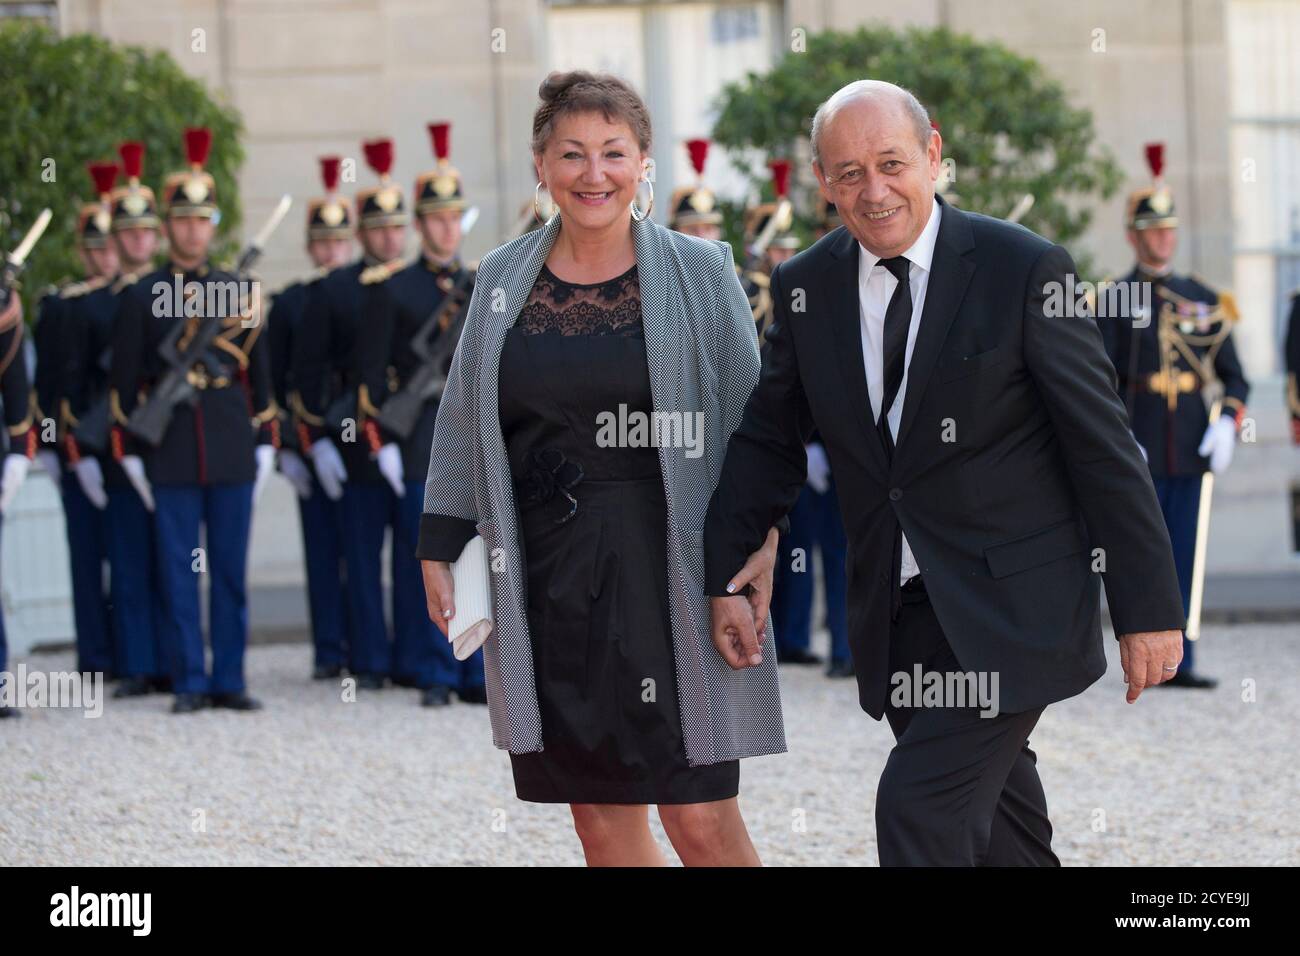 French Defence minister Jean-Yves Le Drian (R) and his wife Maria Vadillo  arrive at the Elysee Palace in Paris, France, to attend a state dinner in  honour of Spain's King and Queen,